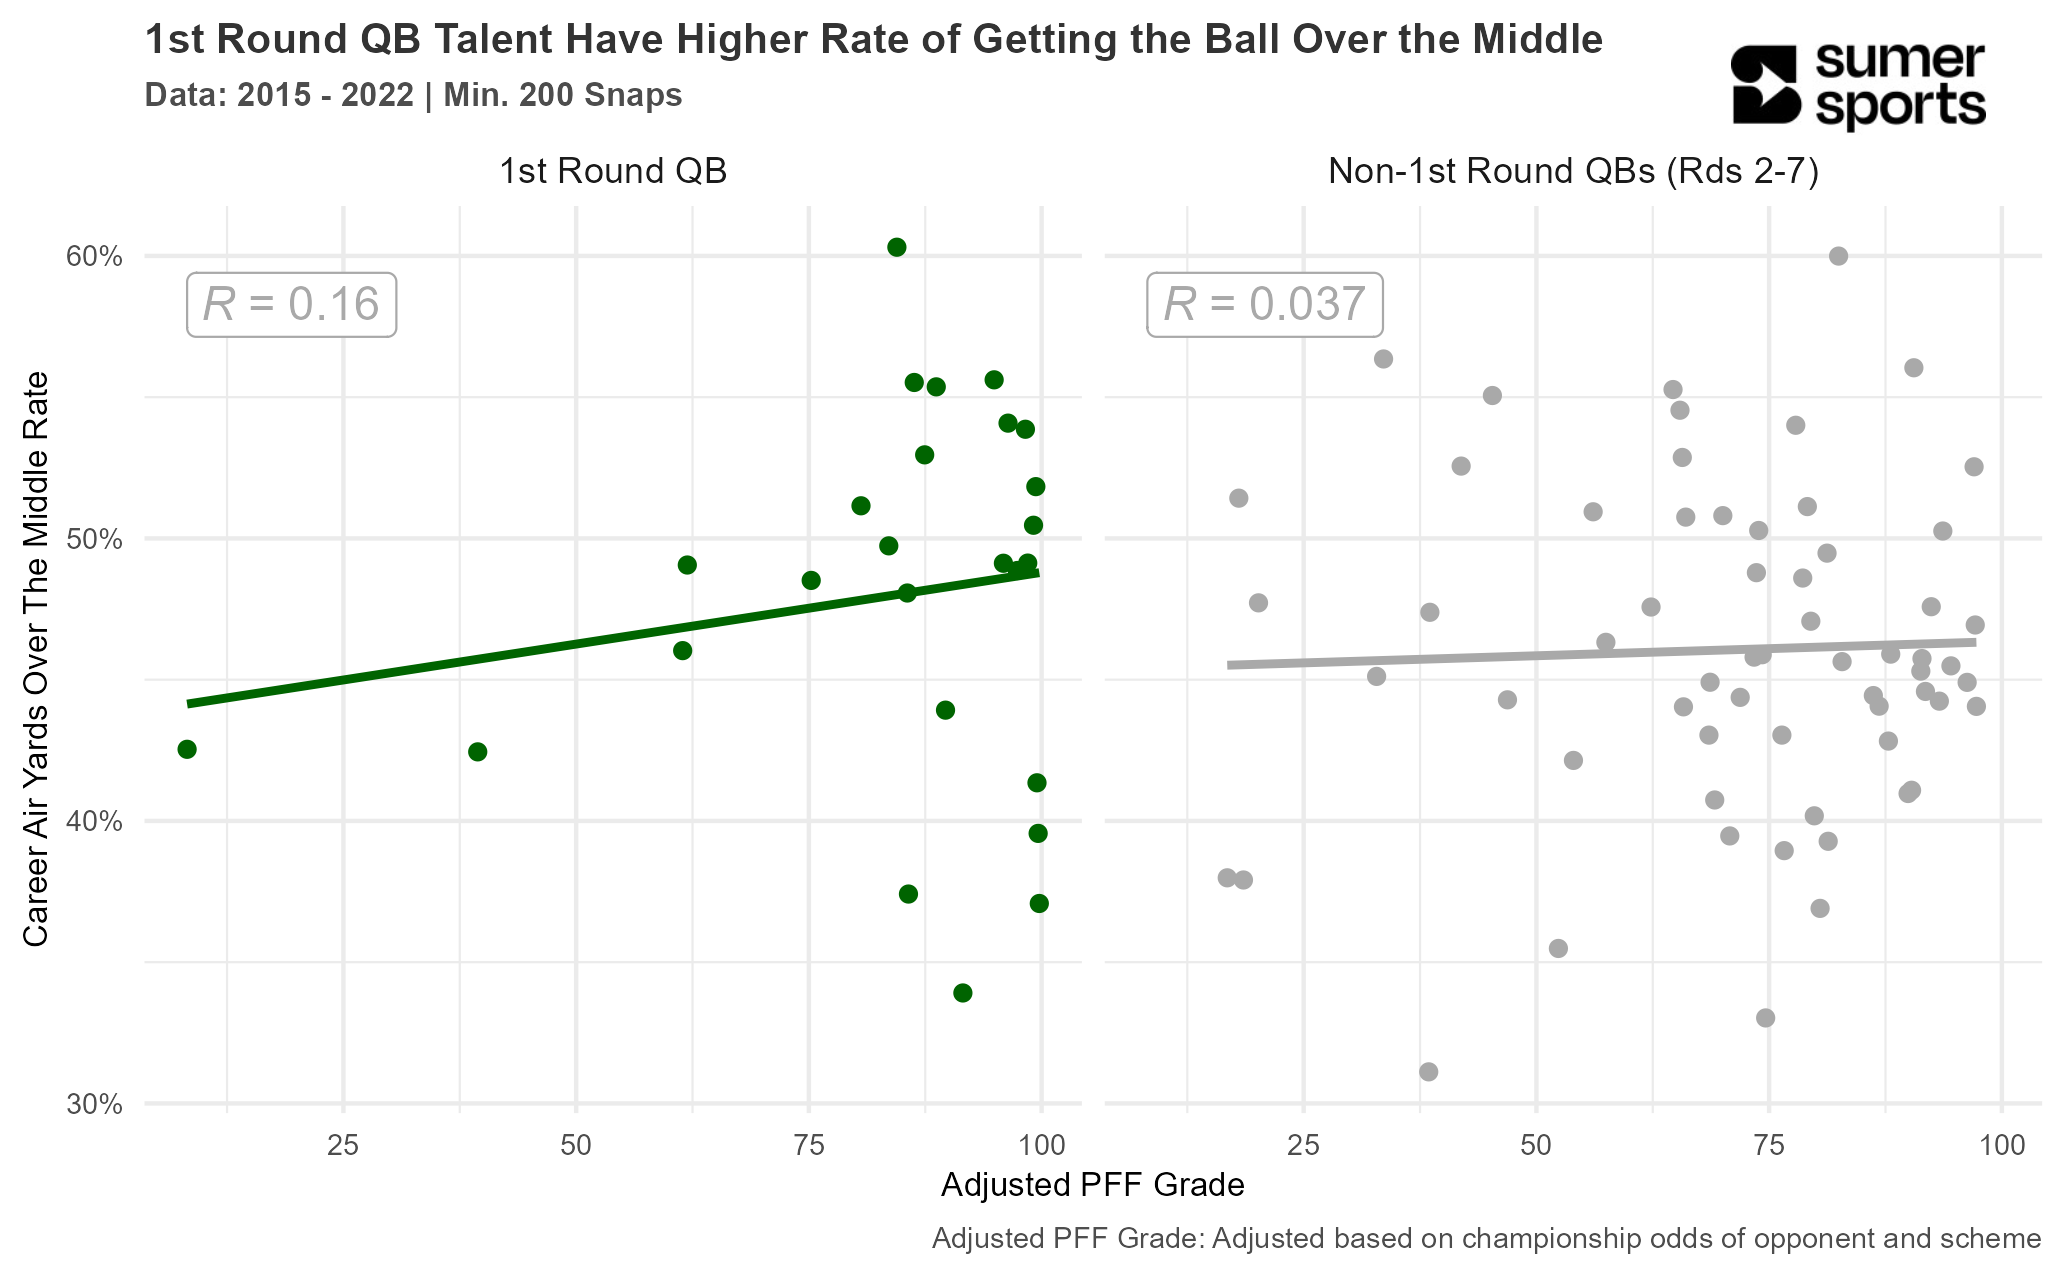 Chart showing that 1st round QB talent have higher rate of getting the ball over the middle